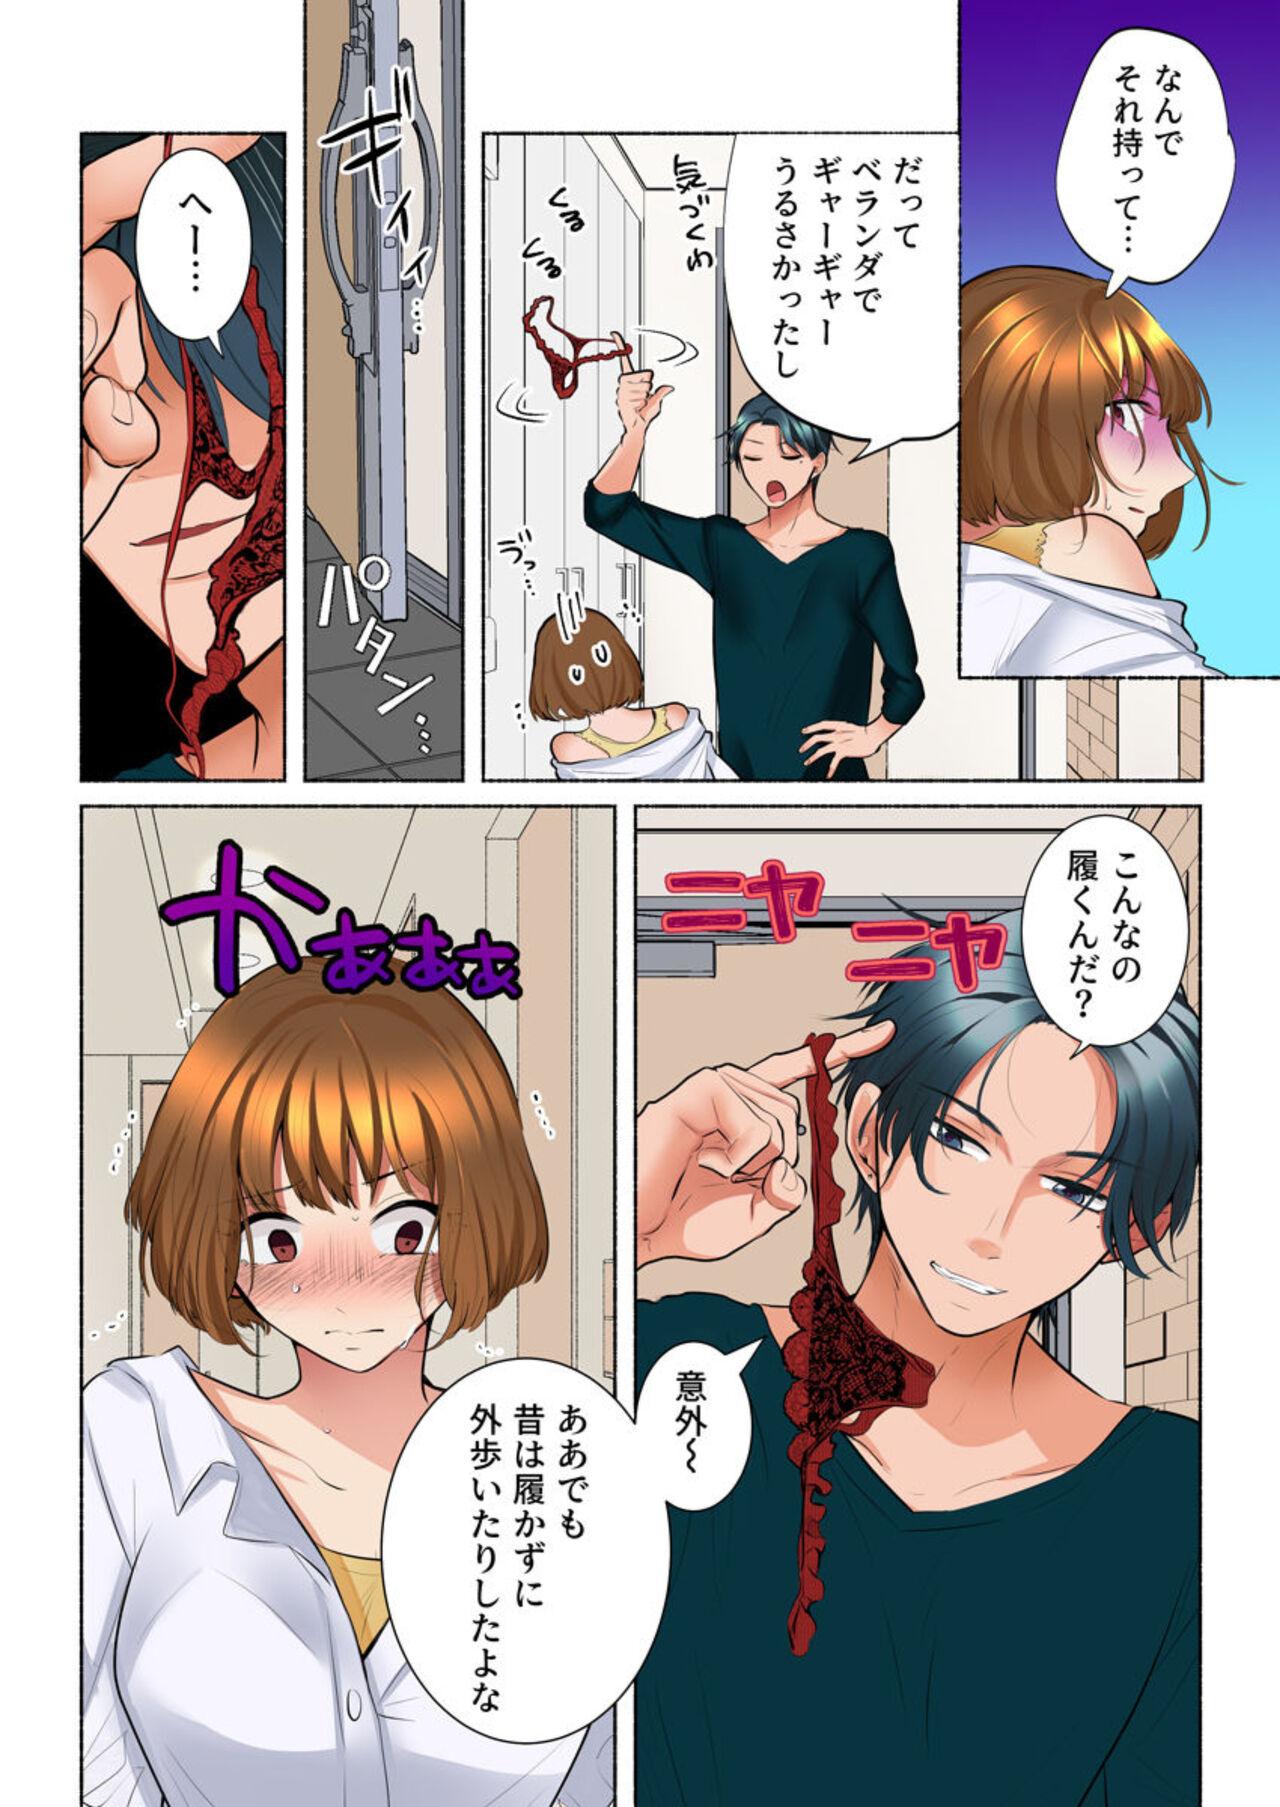 [Ika Hotaru] My Neighbor Is A Sadistic Ex-Boyfriend ~I Love My Husband, But My Aching Body Has Been Redeveloped~ (Full Color) 1 21